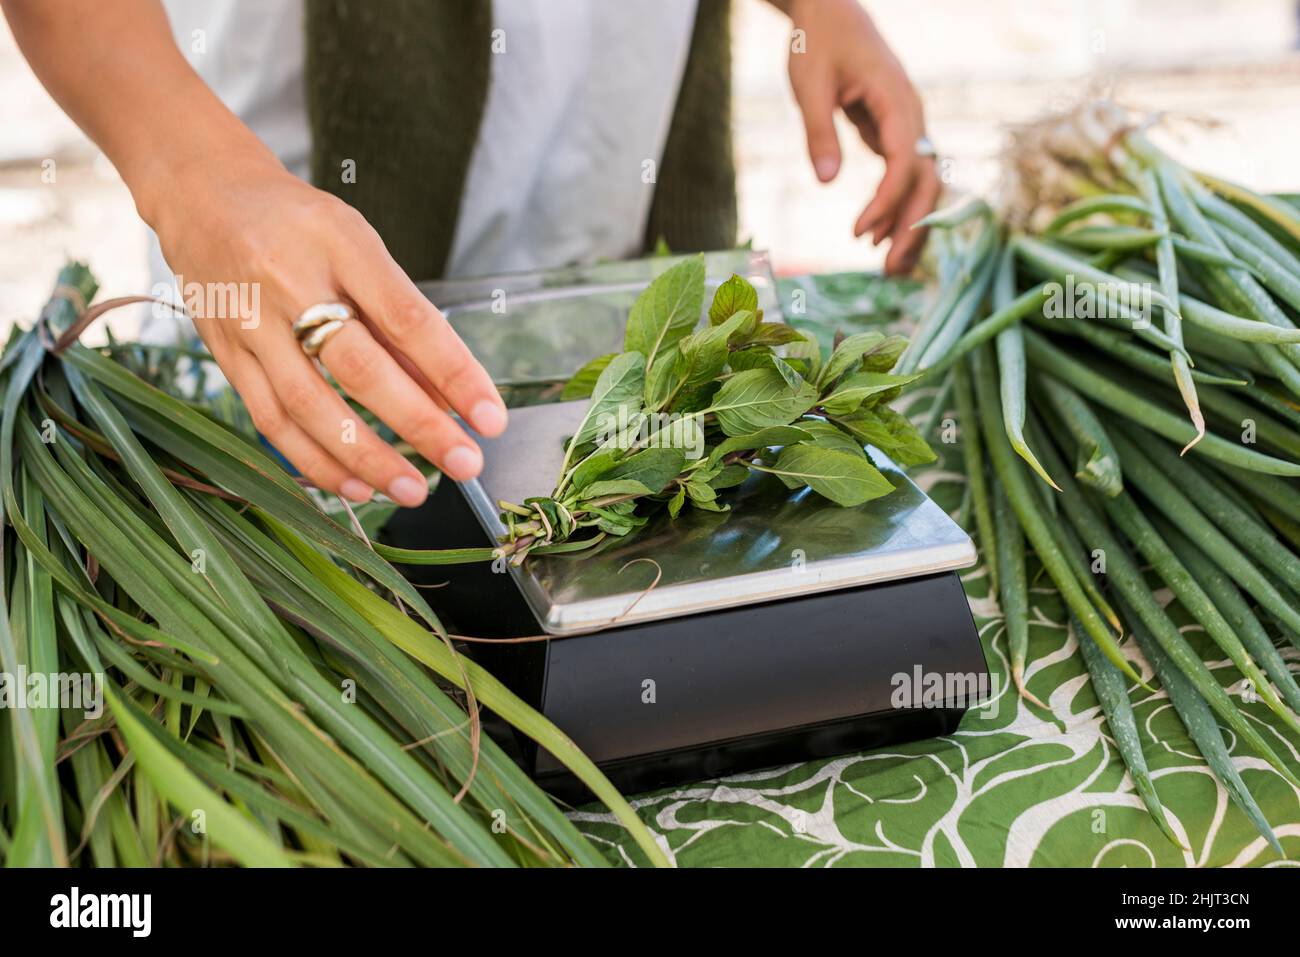 Weighing bundle of basil on farm stand scale Stock Photo